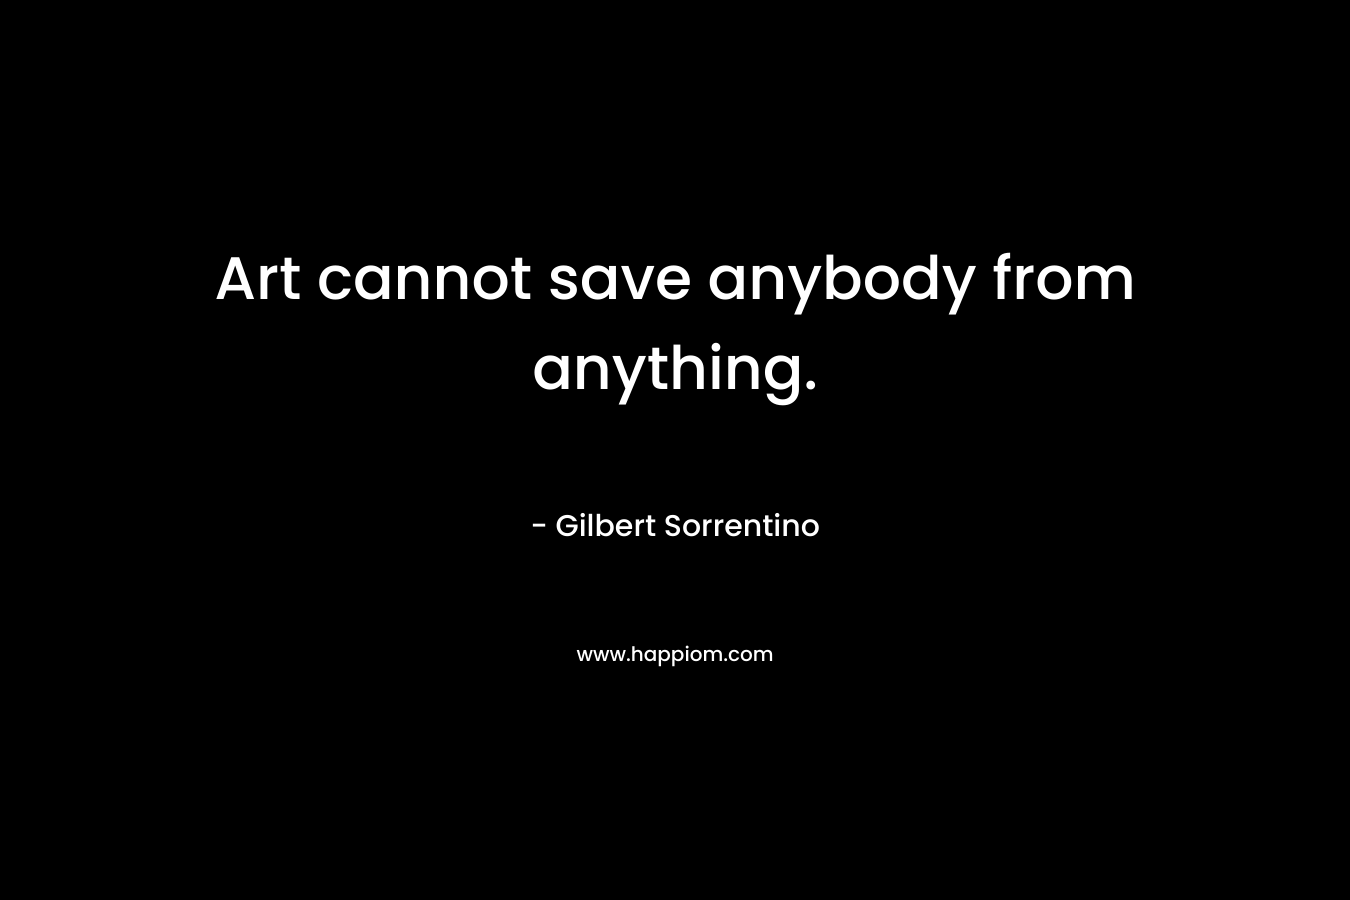 Art cannot save anybody from anything. – Gilbert Sorrentino